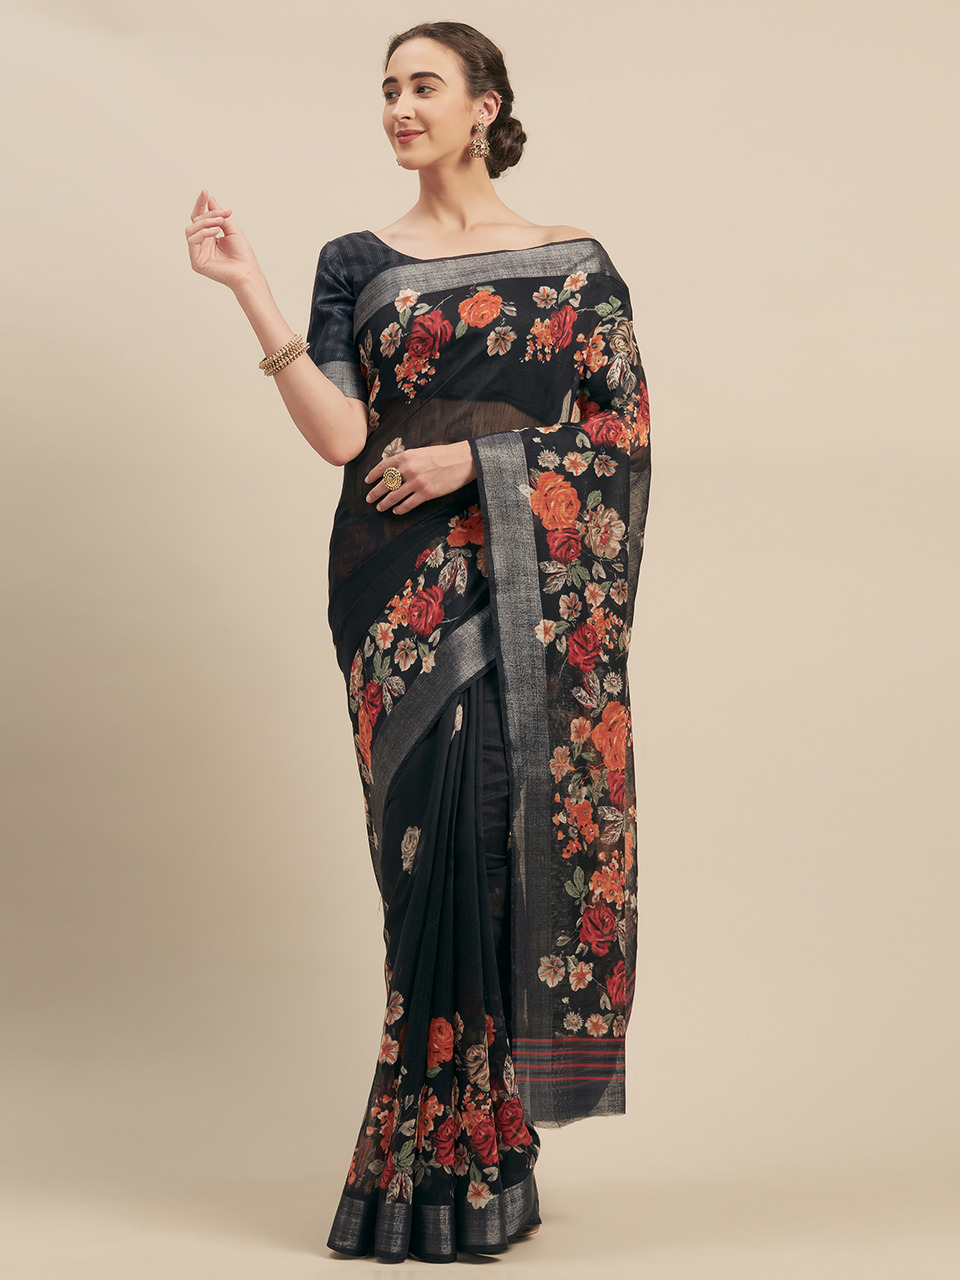 Zinble Floral Printed Linen Cotton Sarees Collection At Whol...